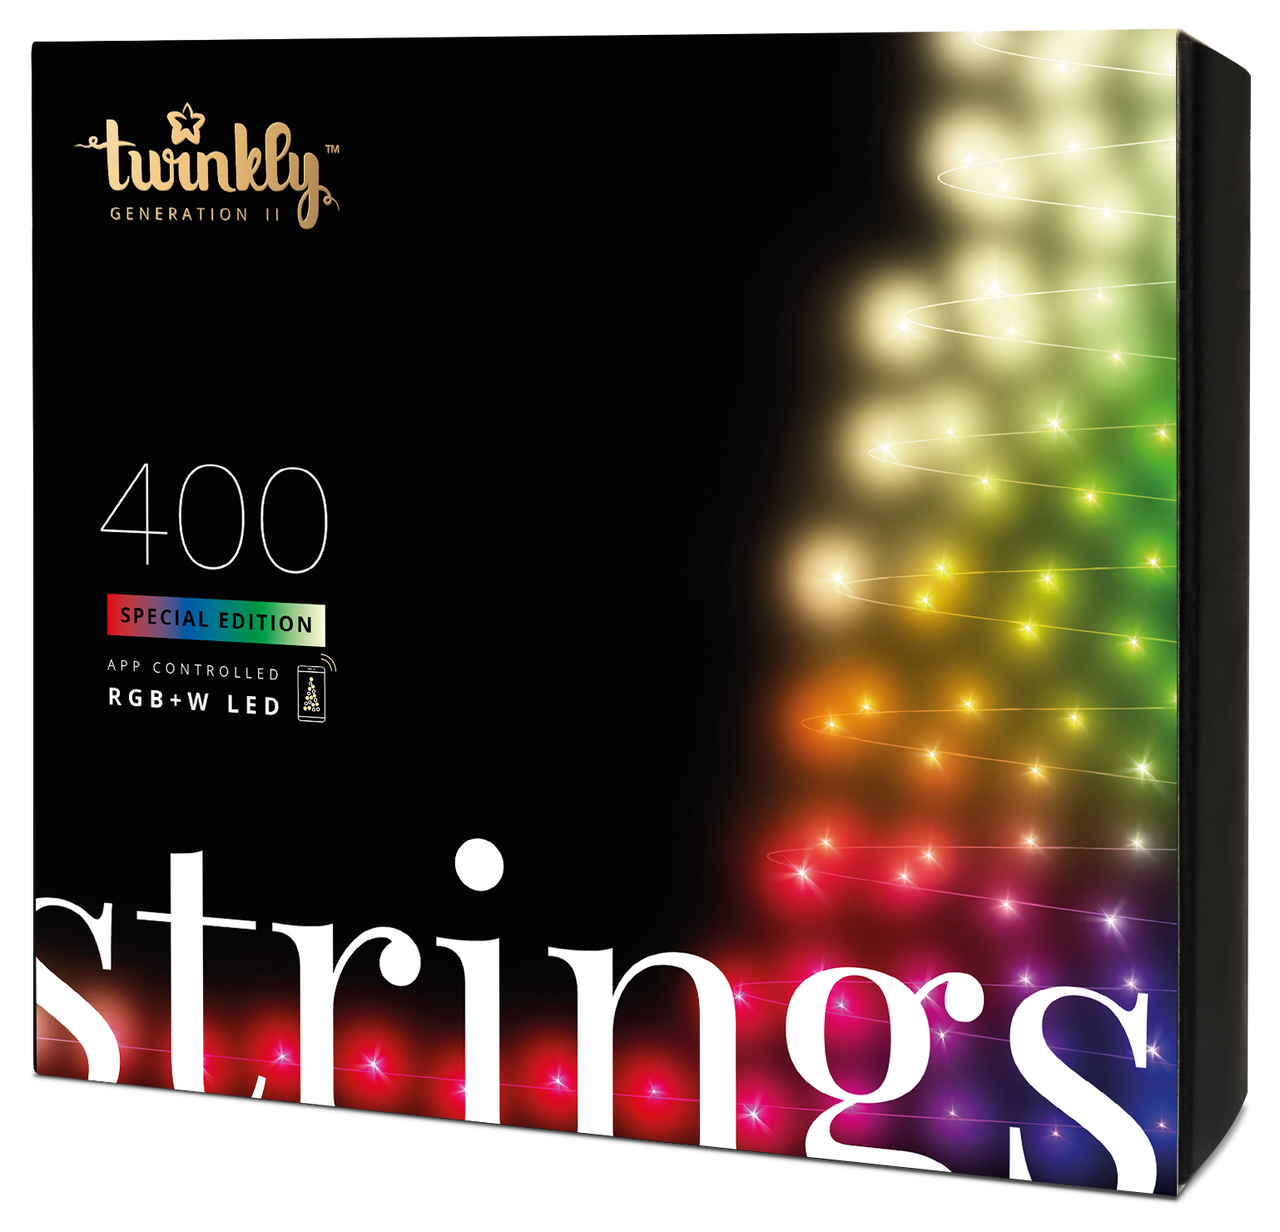 32m 400 LED Twinkly Smart App Controlled String Lights Multi Coloured & White Edition